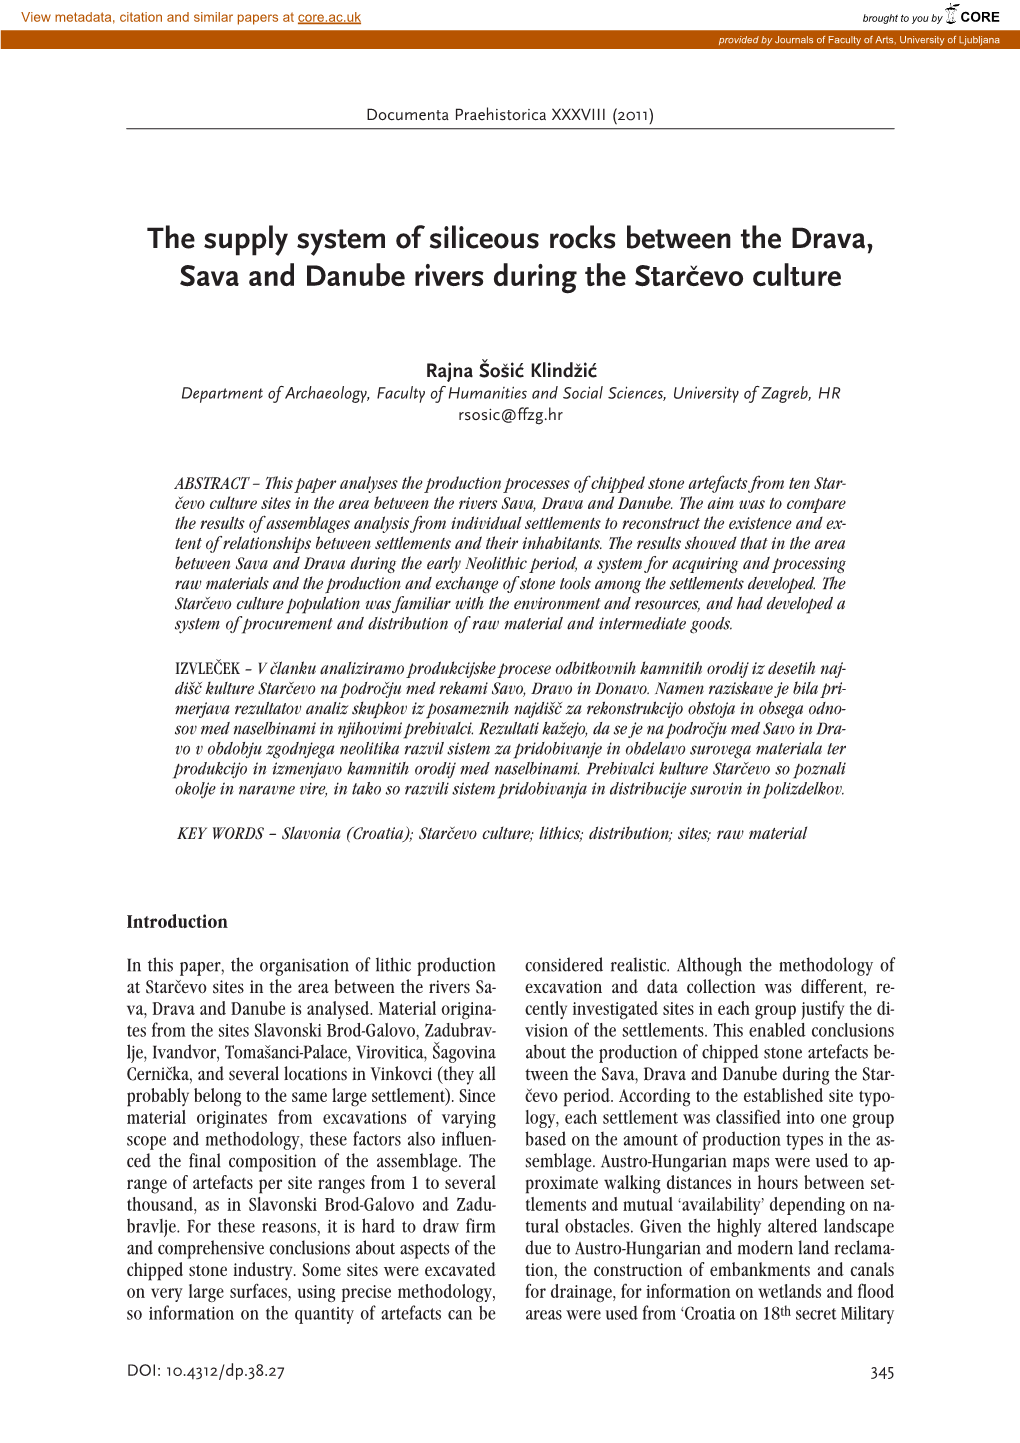 The Supply System of Siliceous Rocks Between the Drava, Sava and Danube Rivers During the Star;Evo Culture